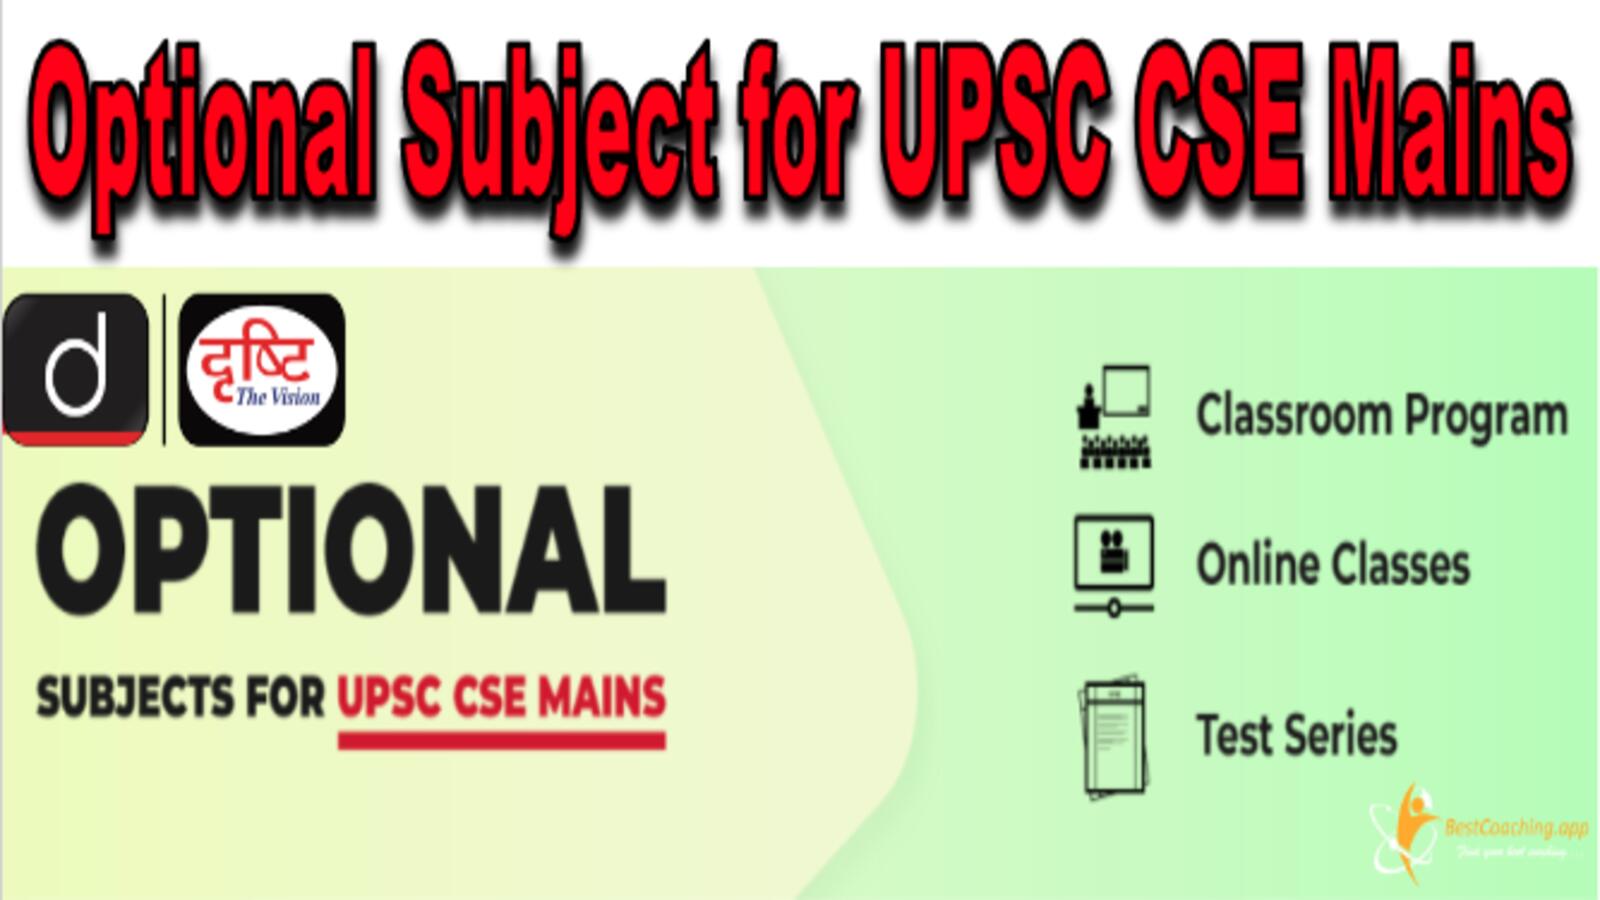 Optional Subjects for UPSC CSE Mains